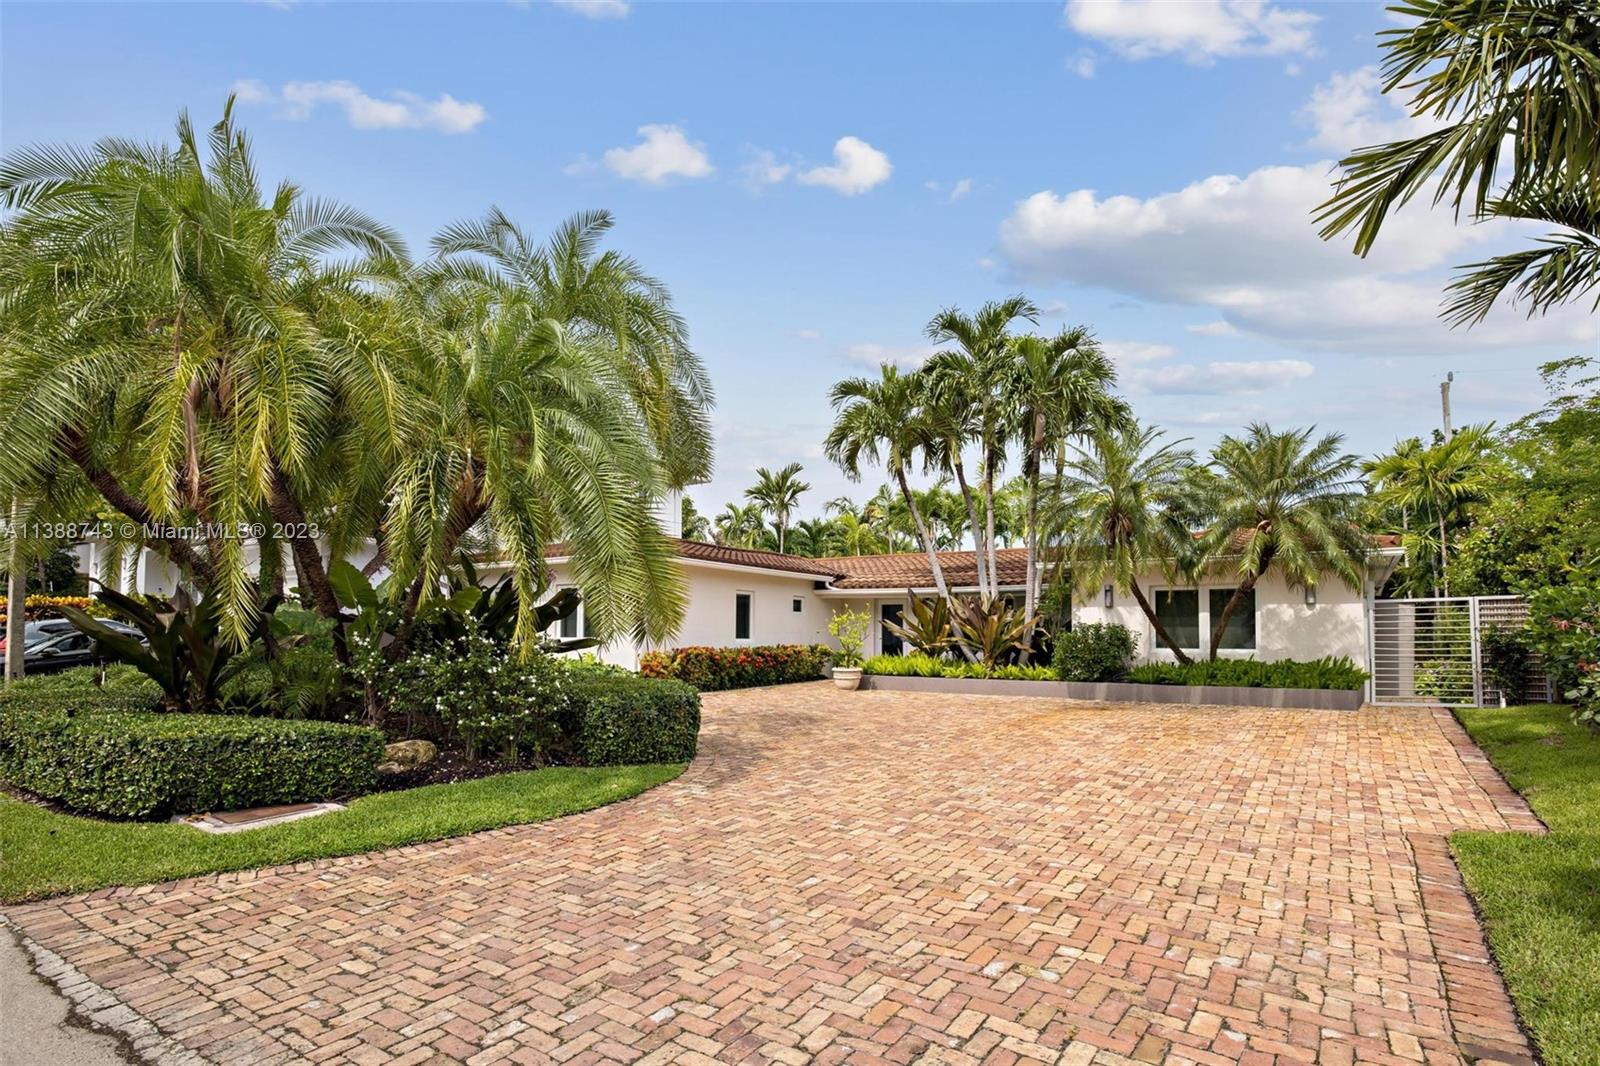 Welcome to this exceptional residence located in the prestigious Key Biscayne community. This magnificent home boasts 5 spacious bedrooms and 4.5 luxurious, all in-suite bathrooms, for utmost comfort and privacy. Step inside and be captivated by the elegance and charm of this meticulously designed property. Open floor plan seamlessly connects the living spaces, creating a sense of flow and abundance throughout. With a focus on quality and attention to detail, the house showcases top-of-the-line finishes and craftsmanship. 

The heart of the home lies in its beautiful kitchen, featuring modern appliances and ample storage space. The stunning white quartz countertops add a touch of sophistication, making this space perfect for both everyday living and entertaining guests.